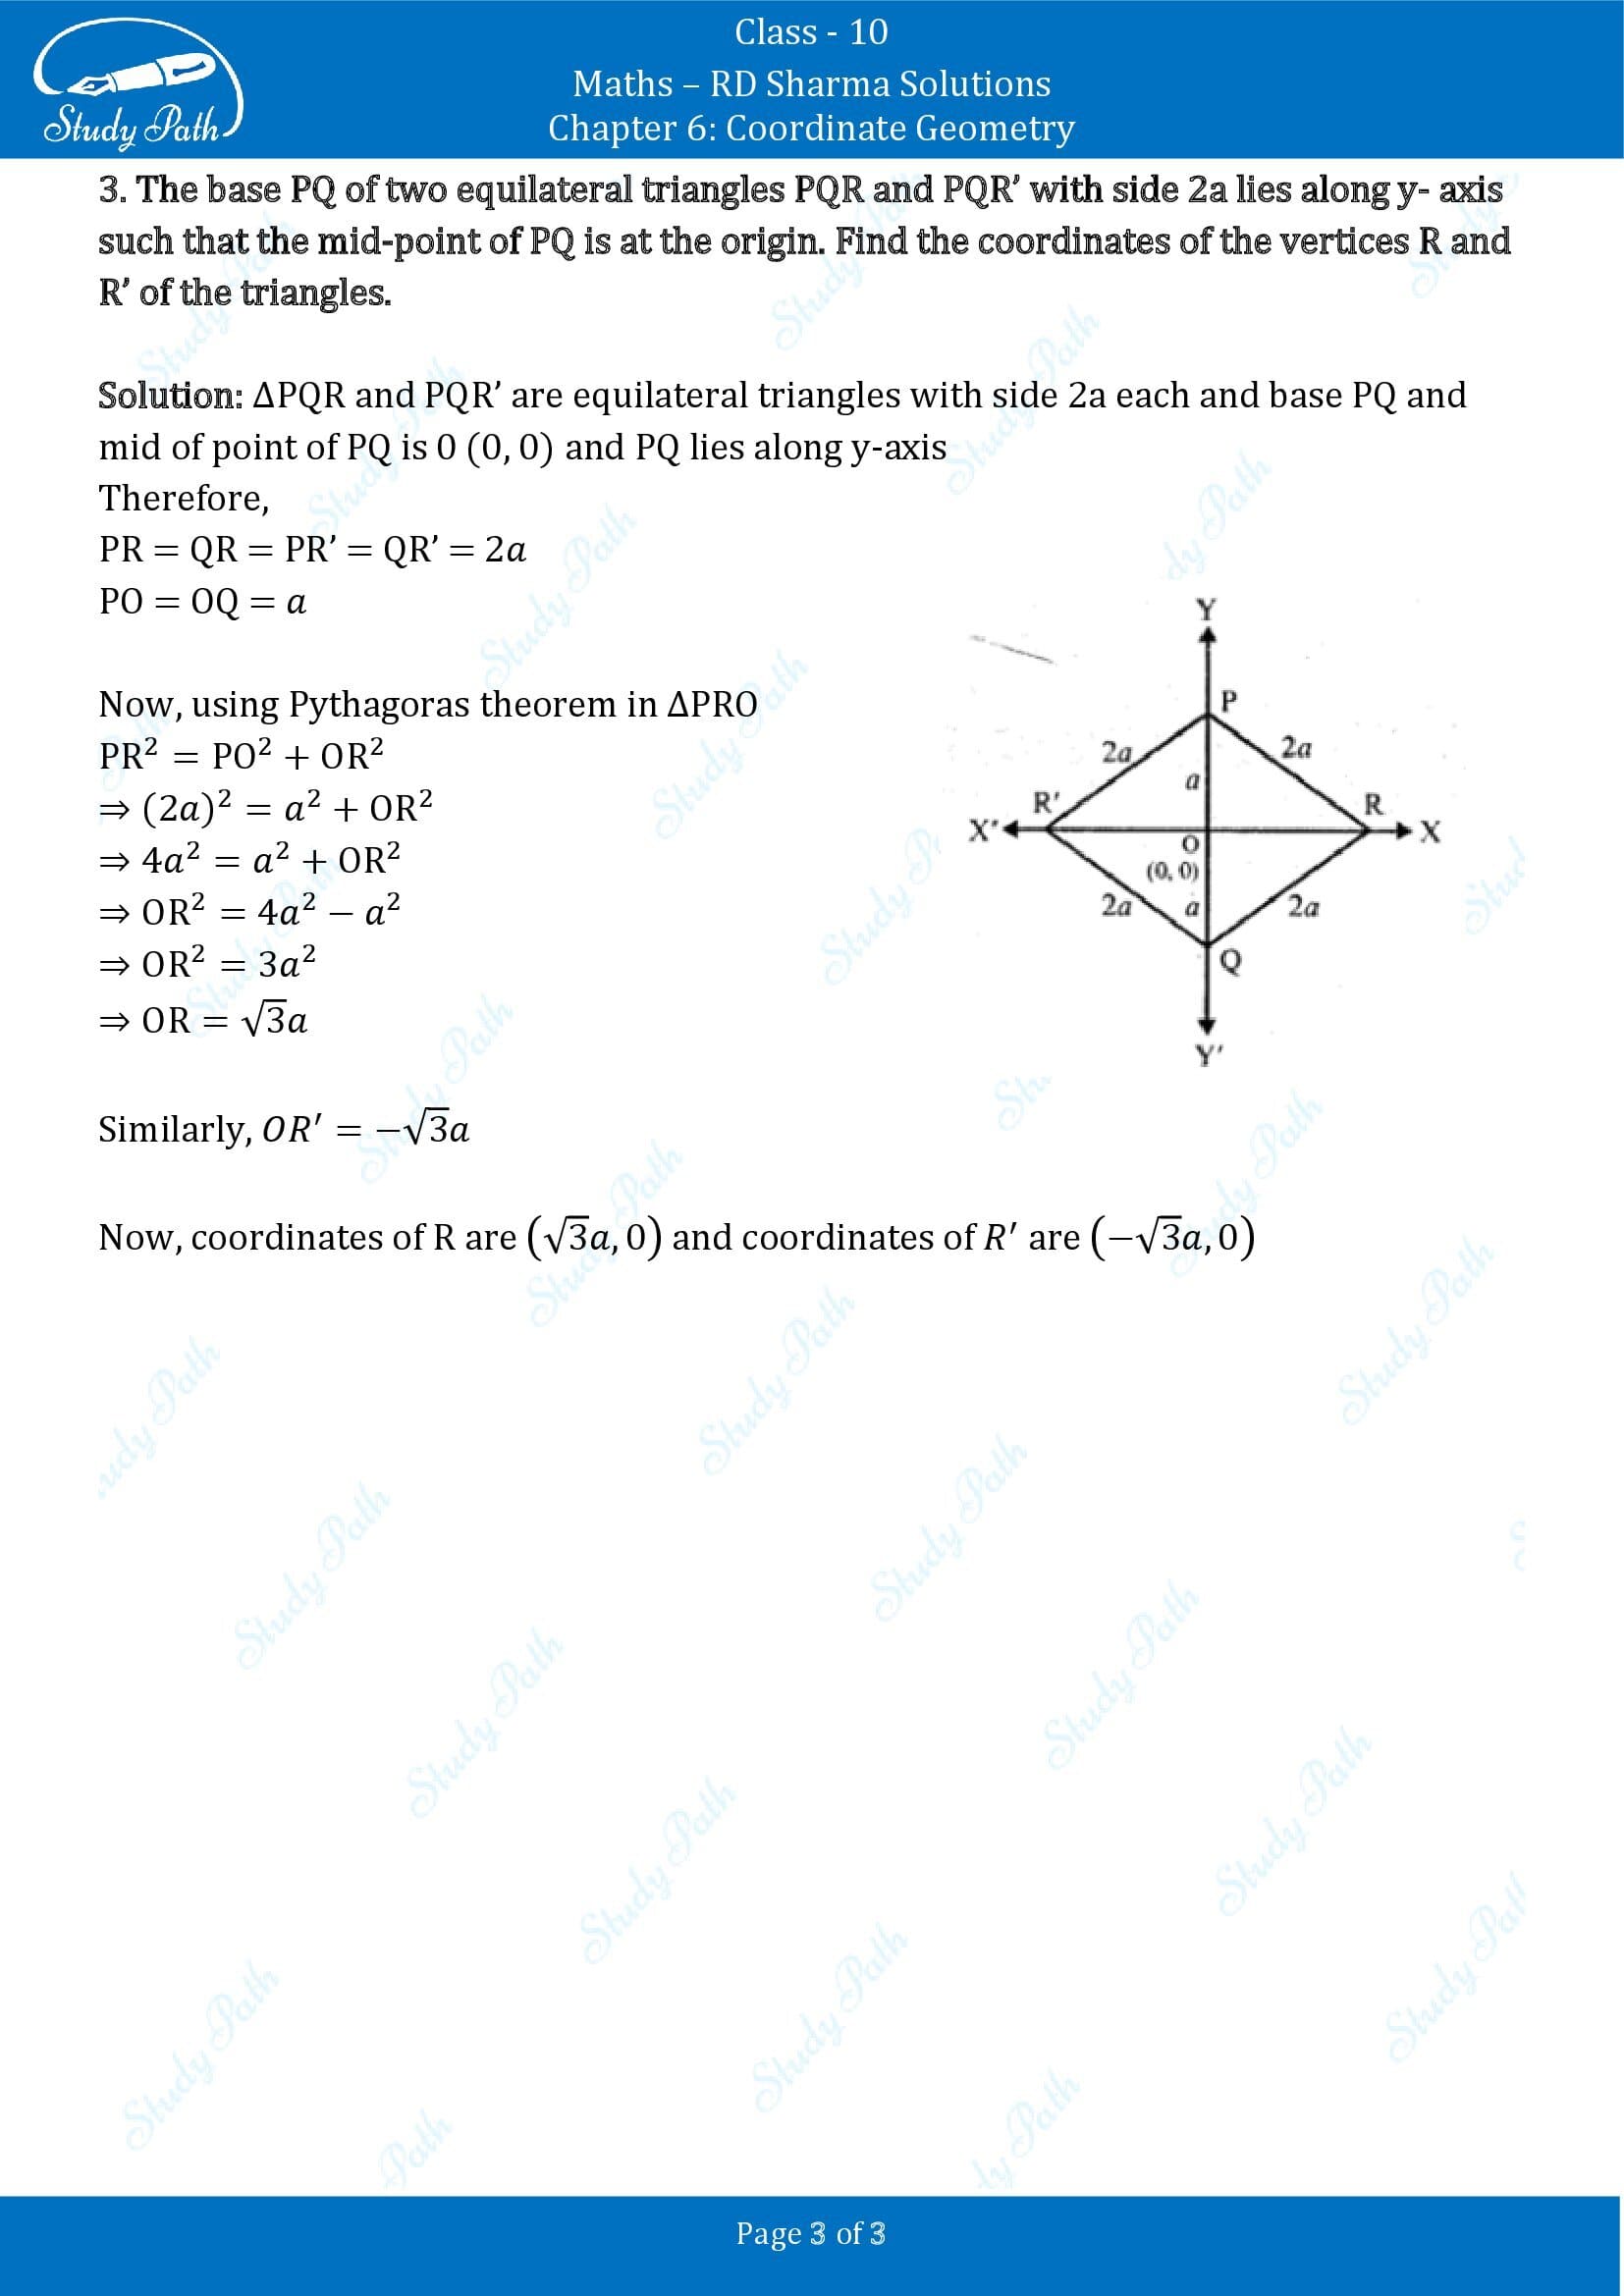 RD Sharma Solutions Class 10 Chapter 6 Coordinate Geometry Exercise 6.1 00003